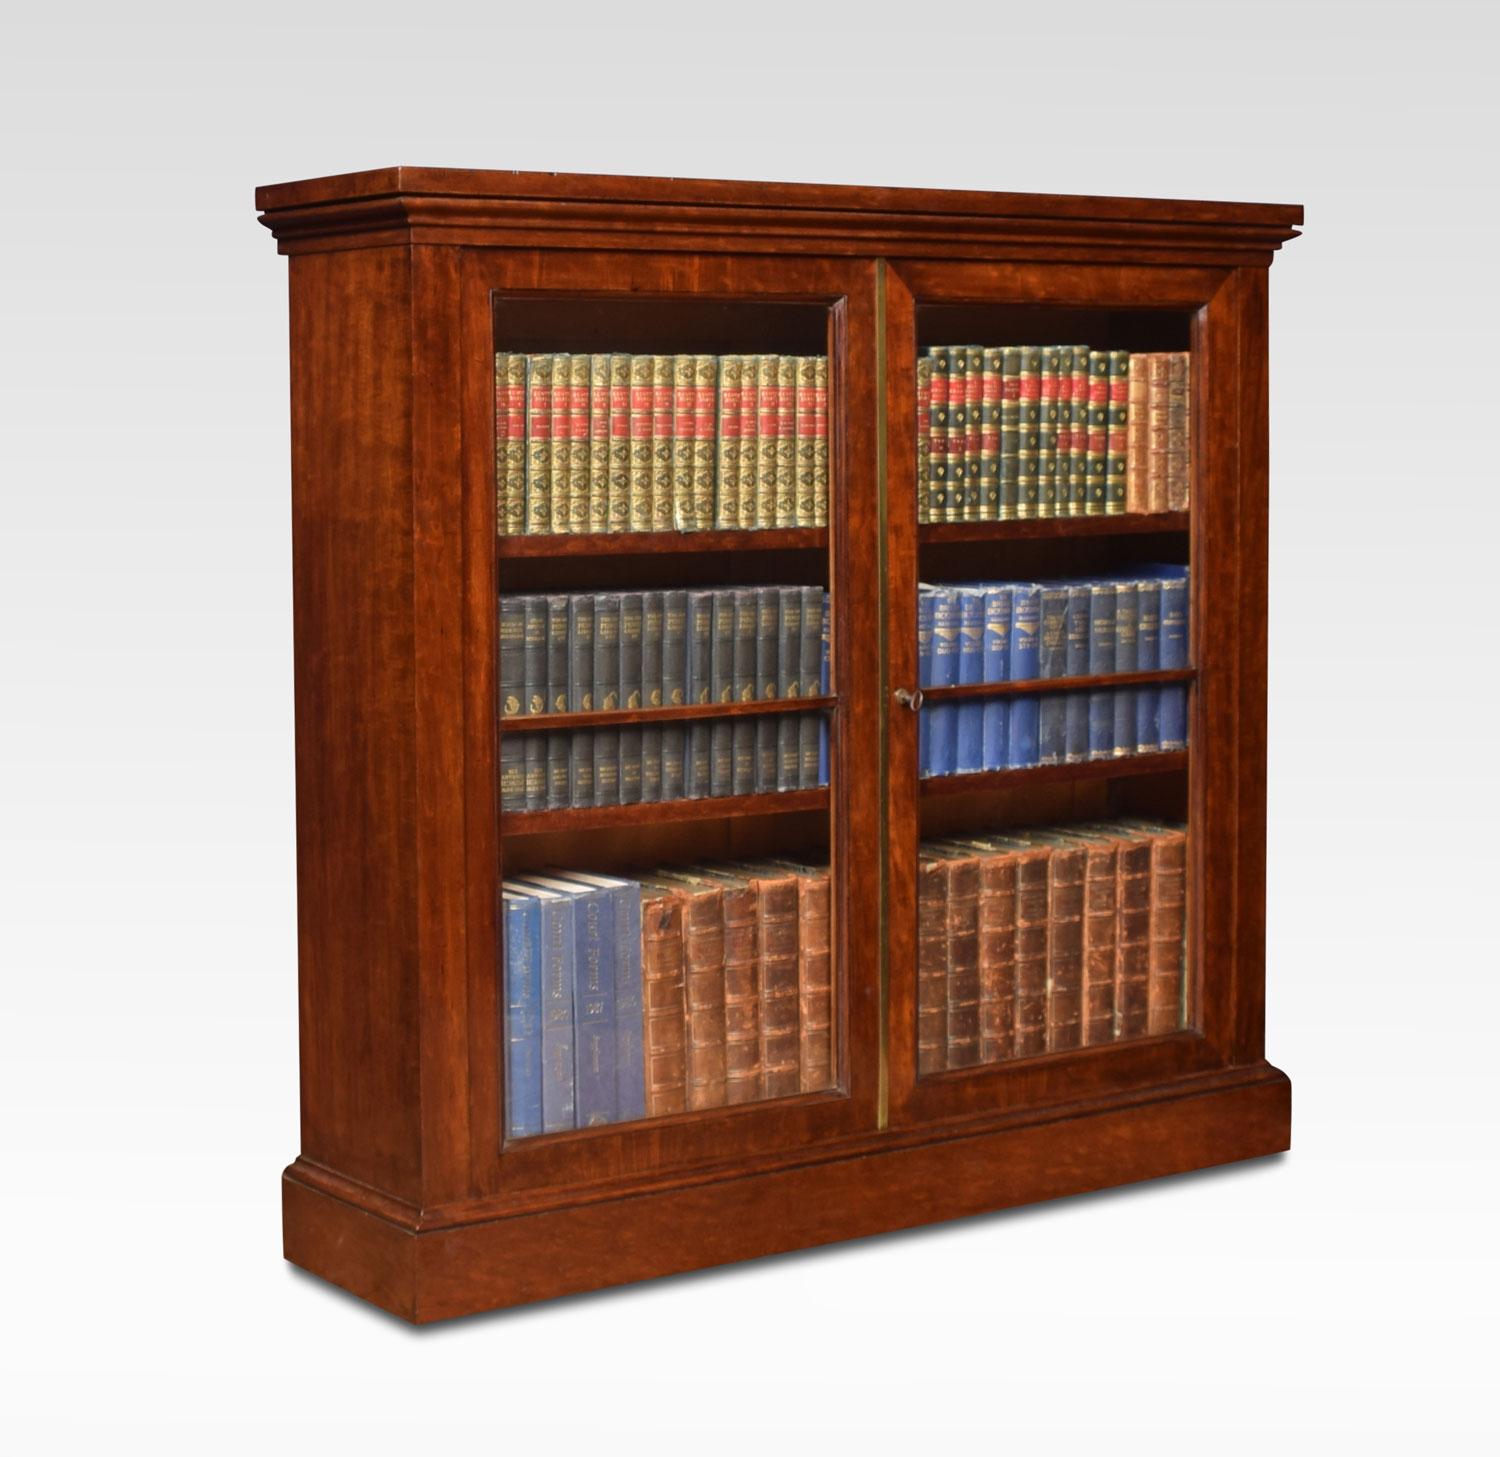 Georgian figured mahogany dwarf bookcase, the large rectangular moulded top above two glazed panelled doors opening to reveal adjustable shelved interior. The door is fitted with a Bramah lock. All raised up on plinth base.
Dimensions:
Height 42